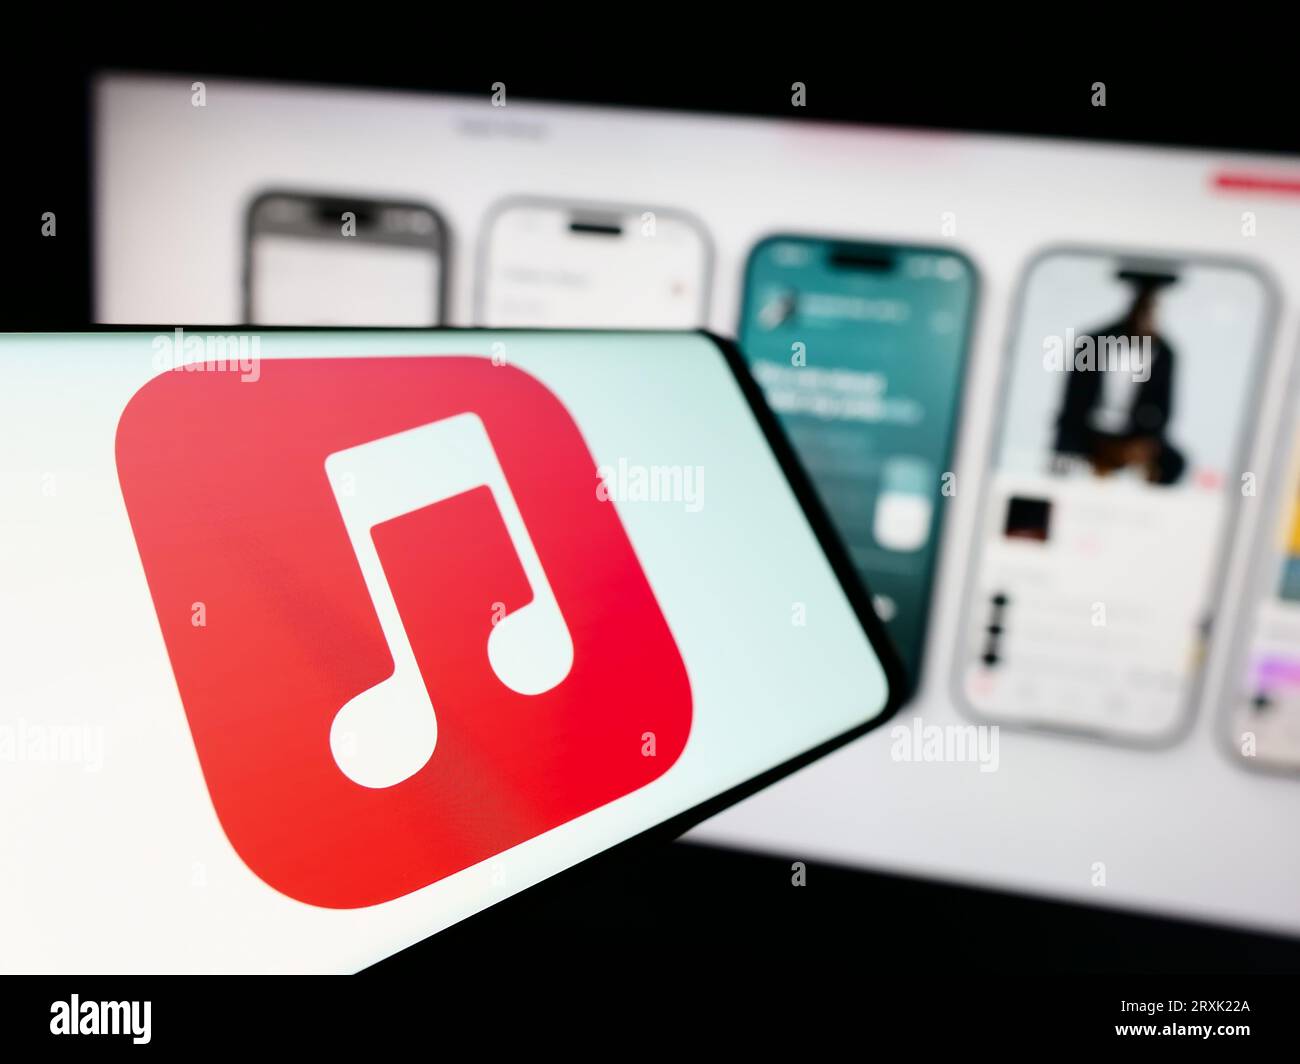 Mobile phone with logo of streaming service platform Apple Music on screen in front of company website. Focus on center-left of phone display. Stock Photo